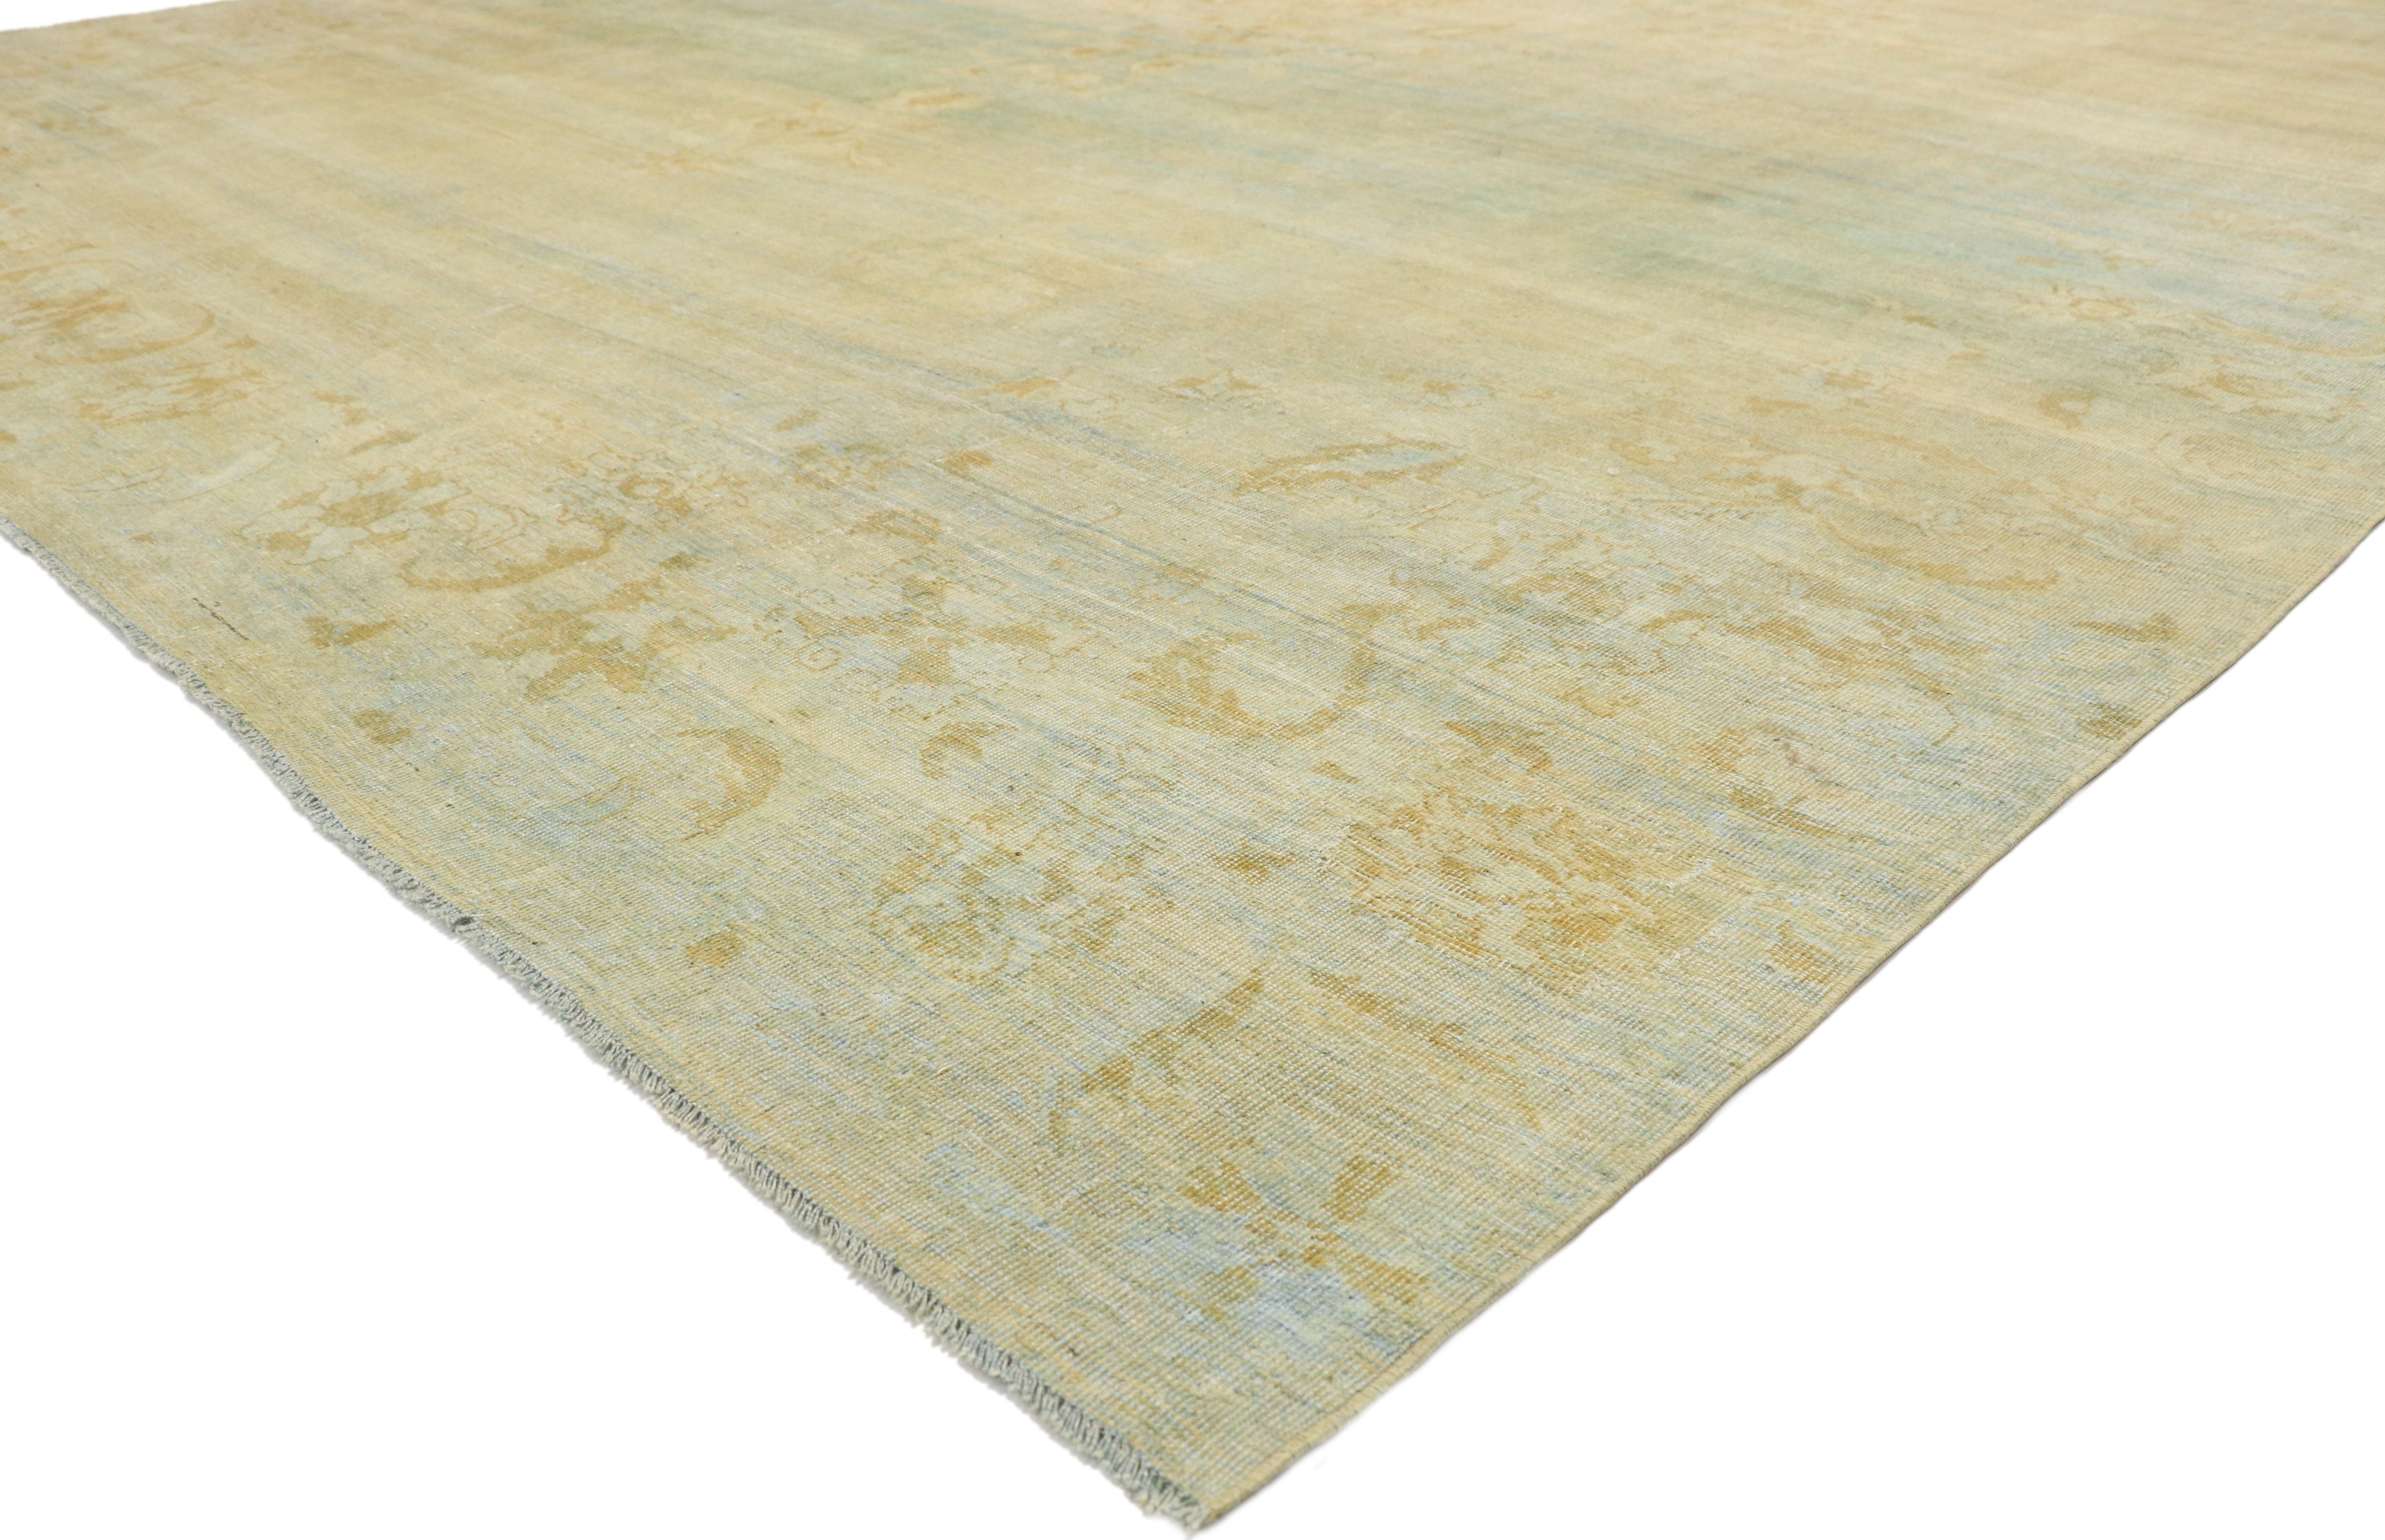 72621, distressed antique Indian Agra Palace rug with Tropical British Colonial style 11'08 X 16'04. With its casual elegance and lovingly timeworn appearance combined with light and airy colors, this hand knotted wool distressed antique Indian